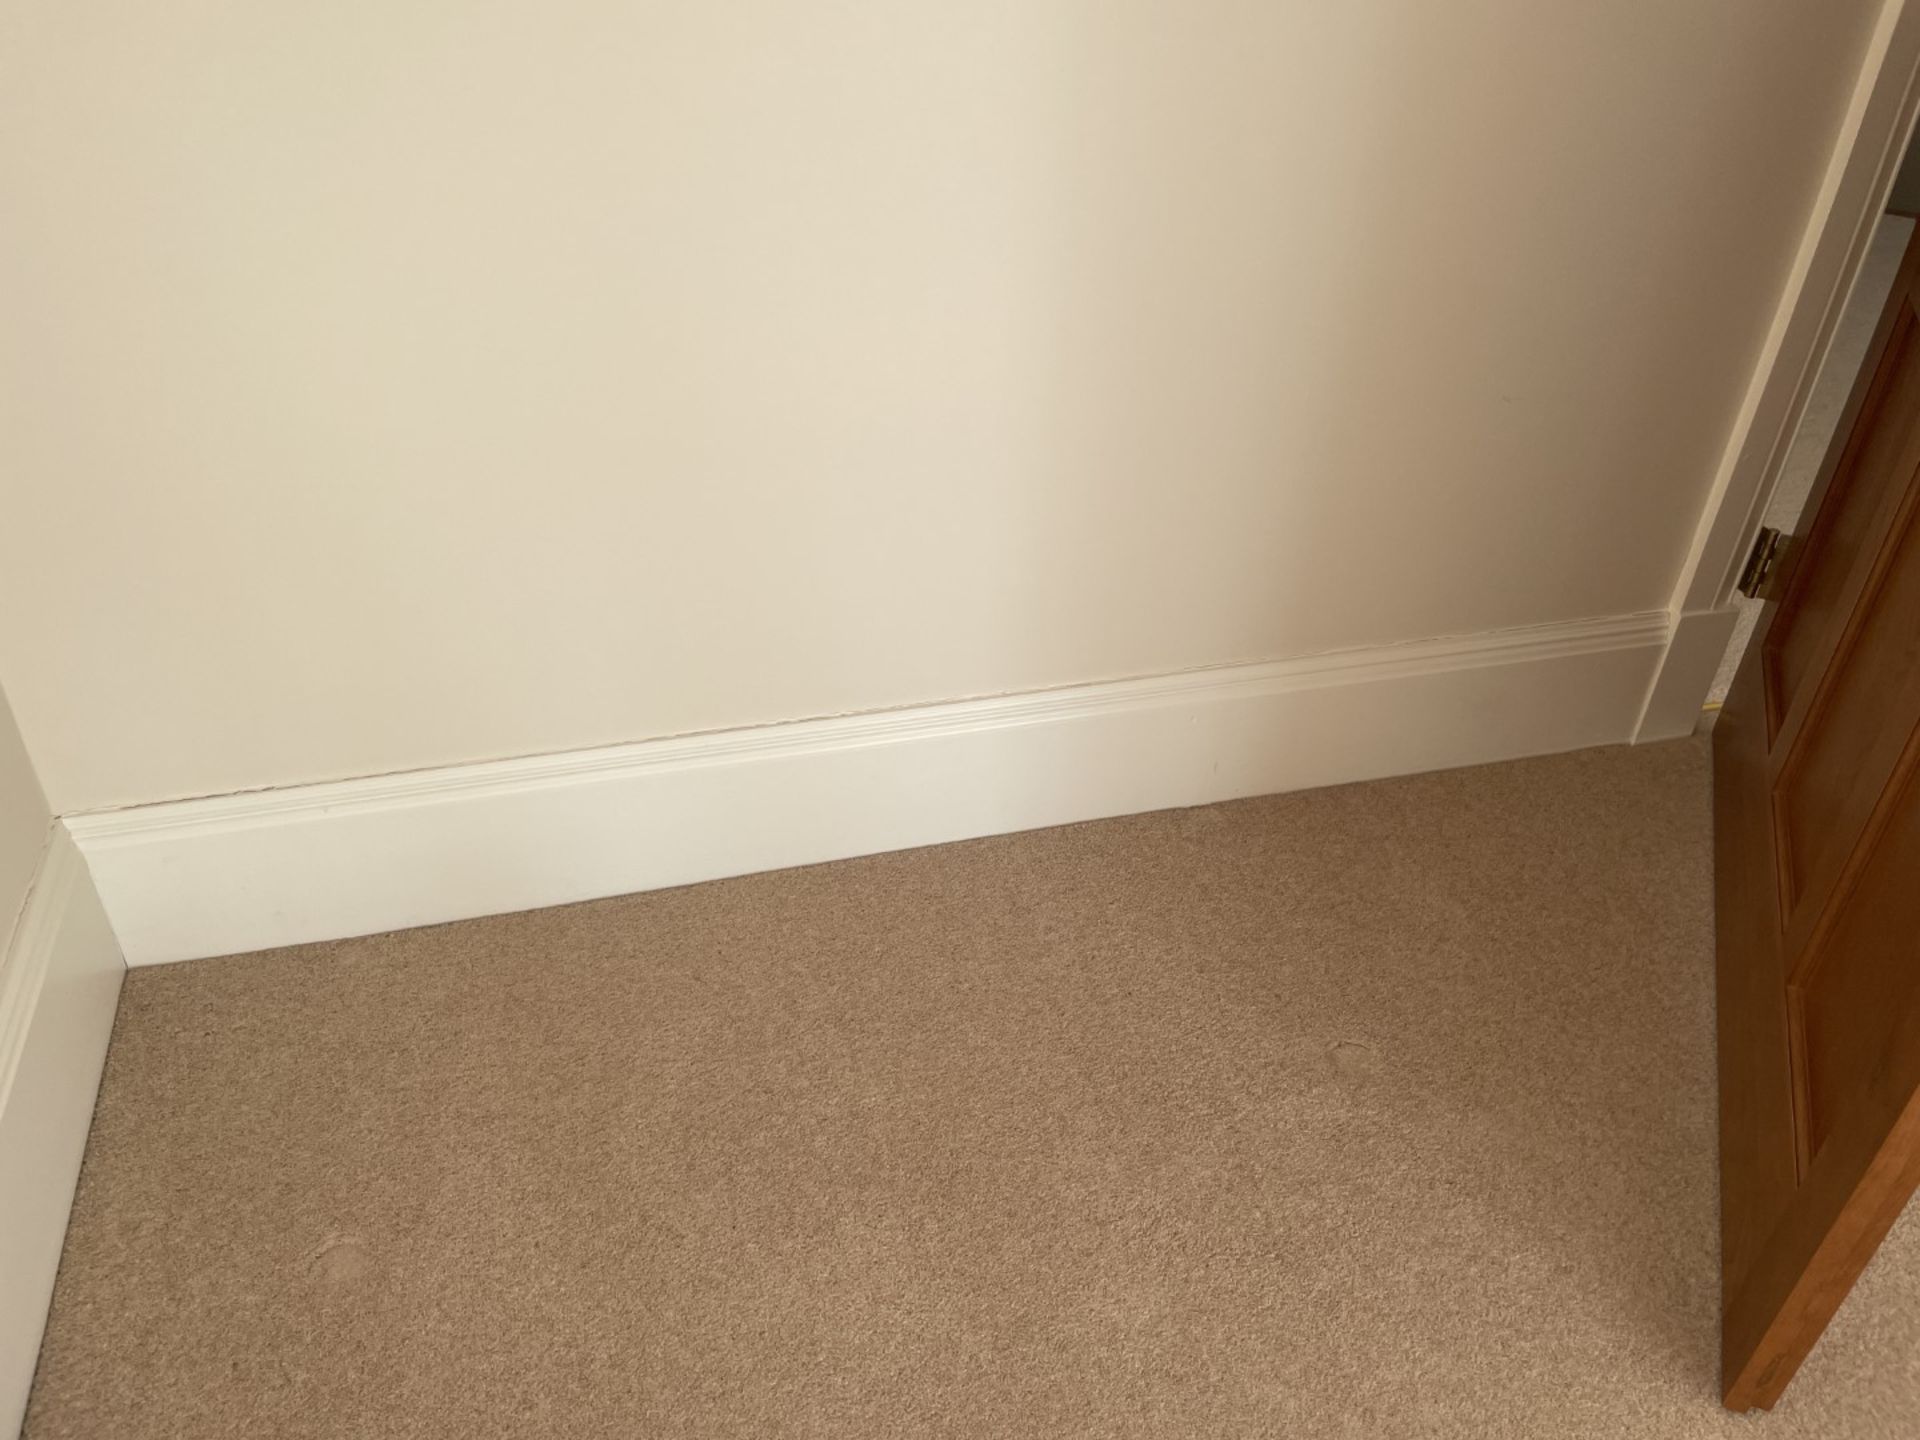 1 x Approximately 22-Metres of Painted Timber Wooden Skirting Boards, In White - Ref: PAN224 - CL896 - Image 3 of 10